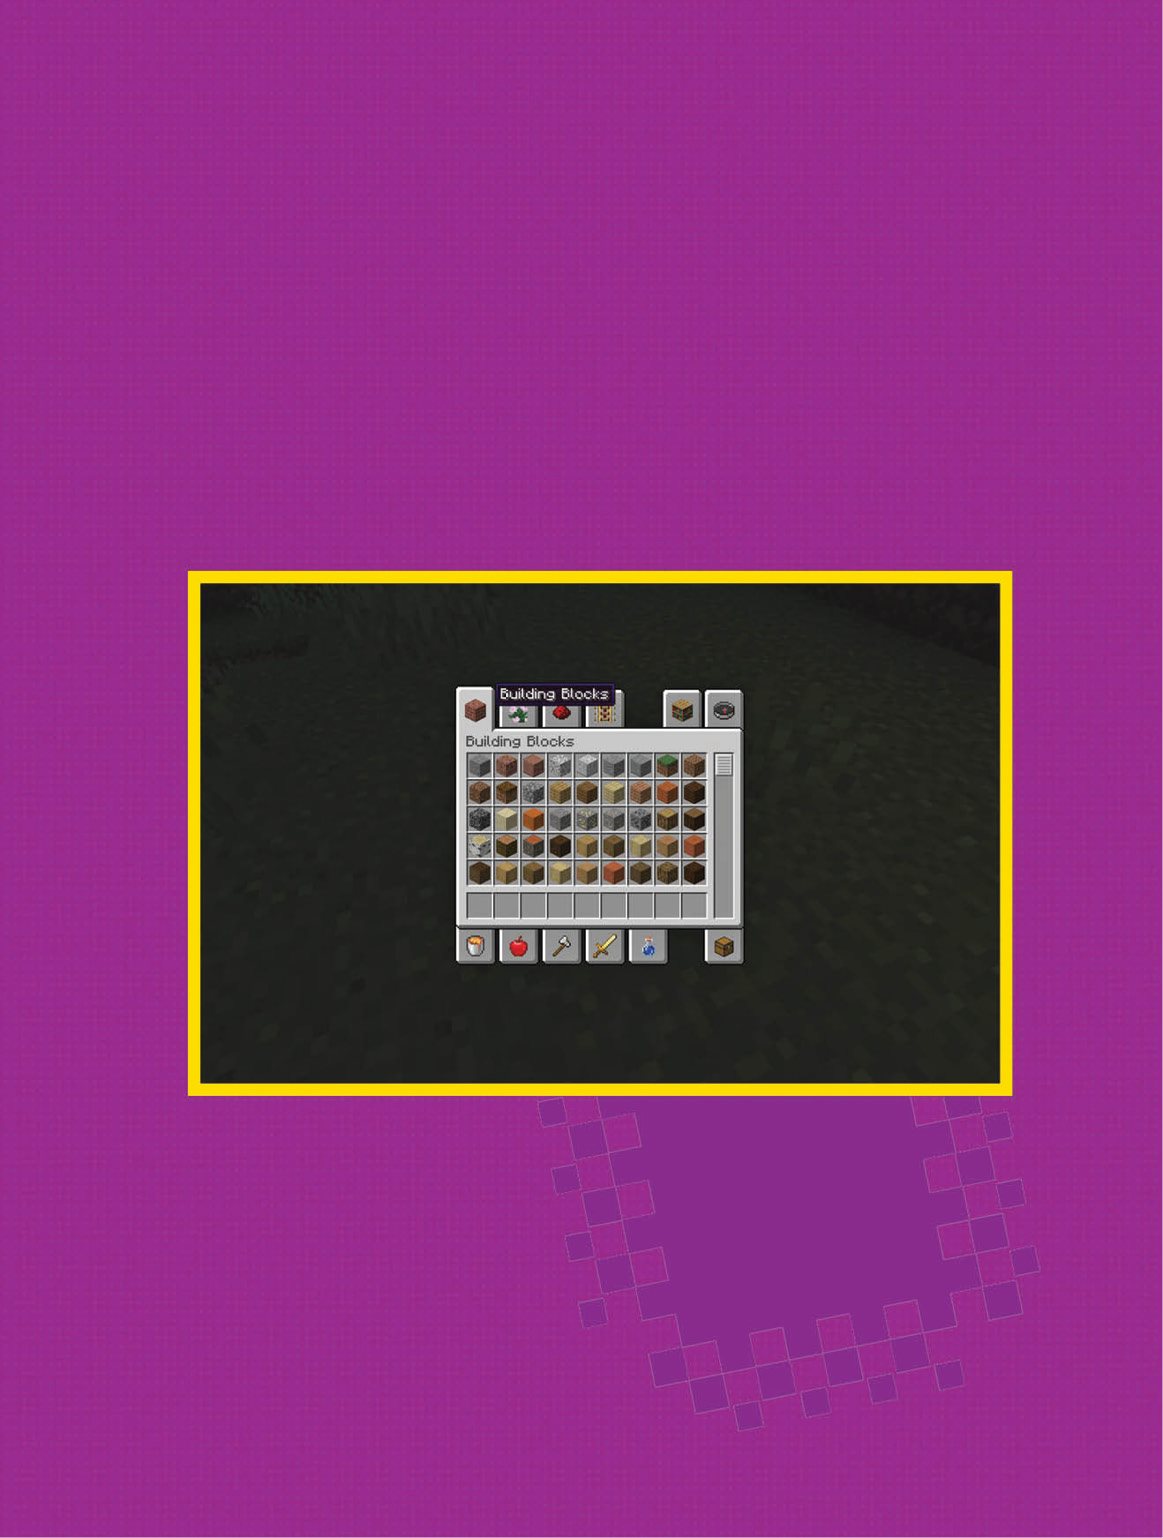 Minecraft Creative Mode An Unofficial Kids Guide - image 23